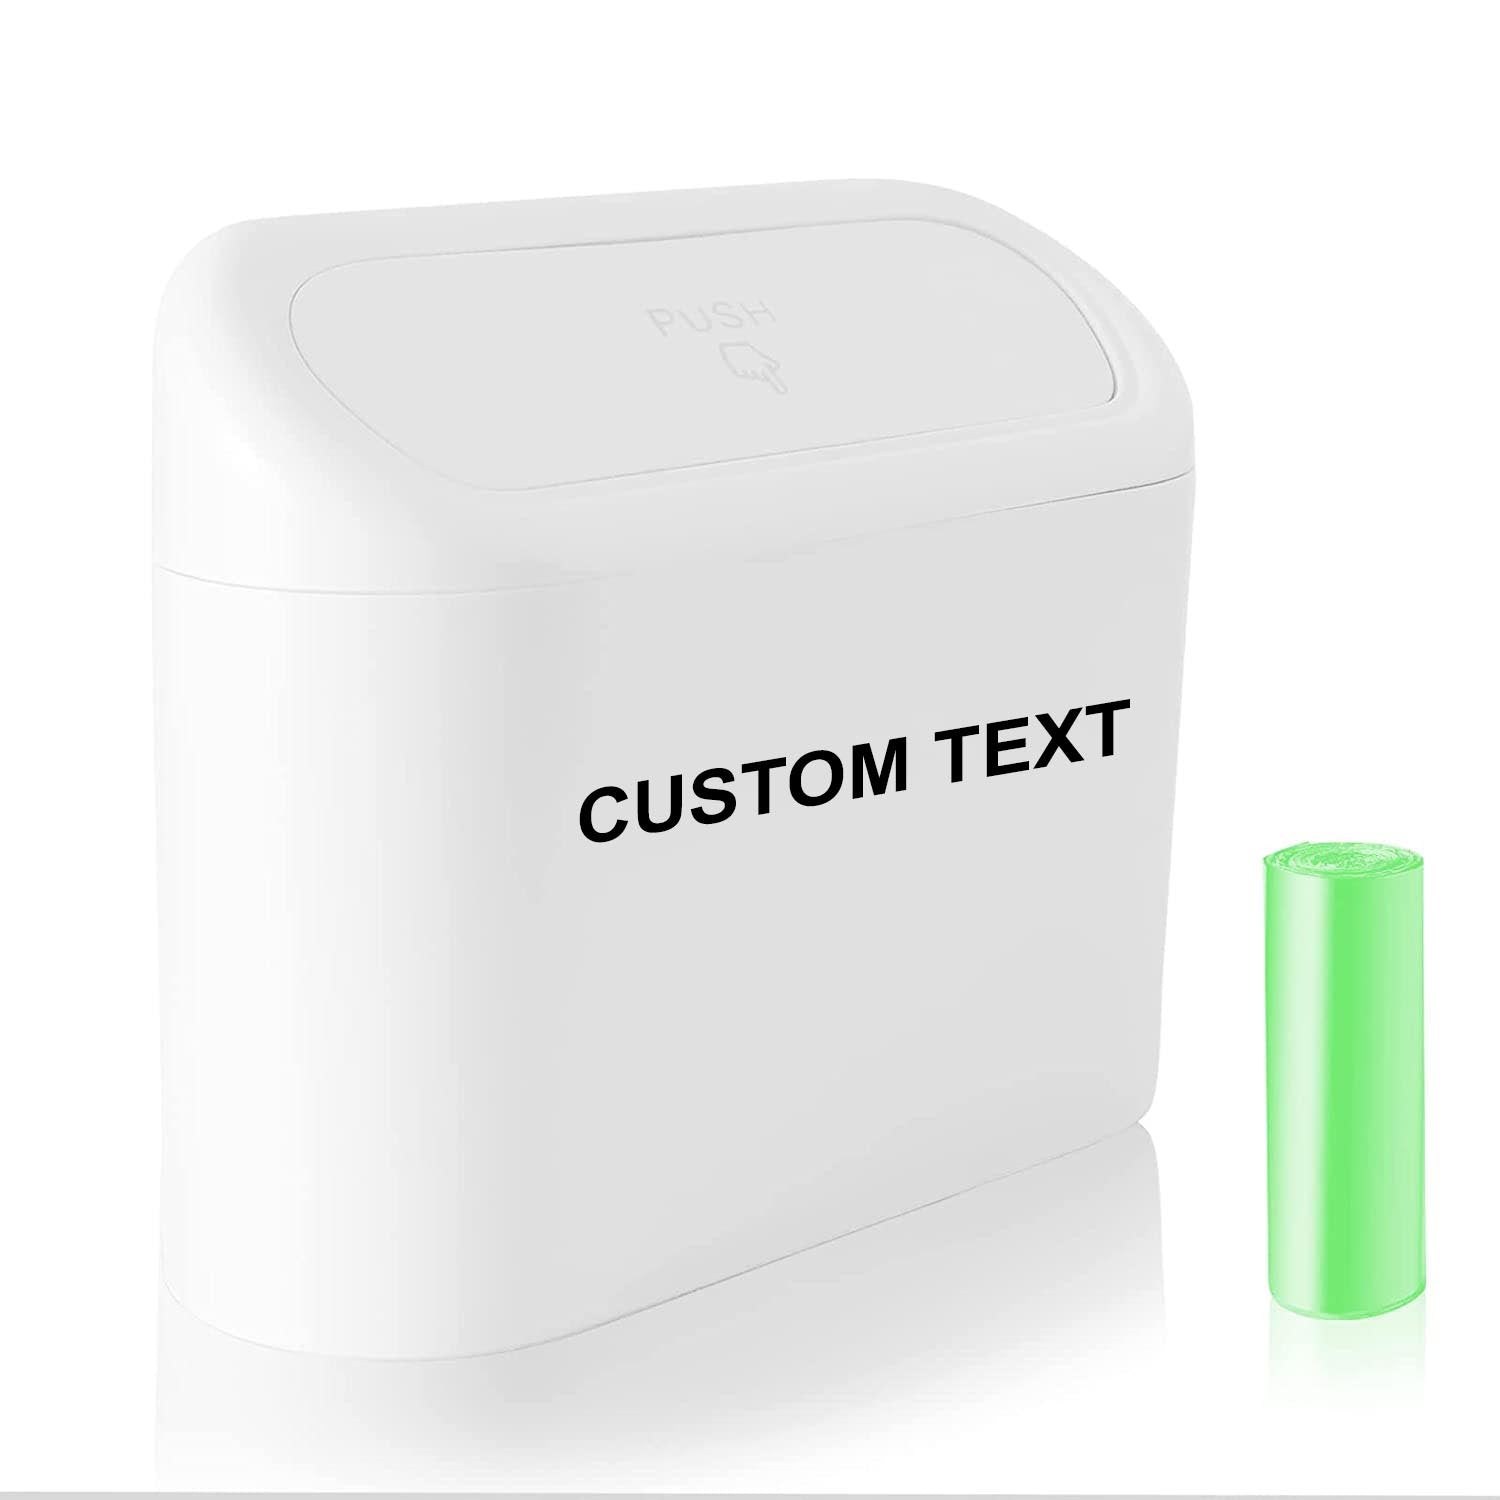 Custom Text and Logo Car Trash Can, Fit with all car, Mini Car Accessories with Lid and Trash Bag, Cute Car Organizer Bin, Small Garbage Can for Storage and Organization - Delicate Leather